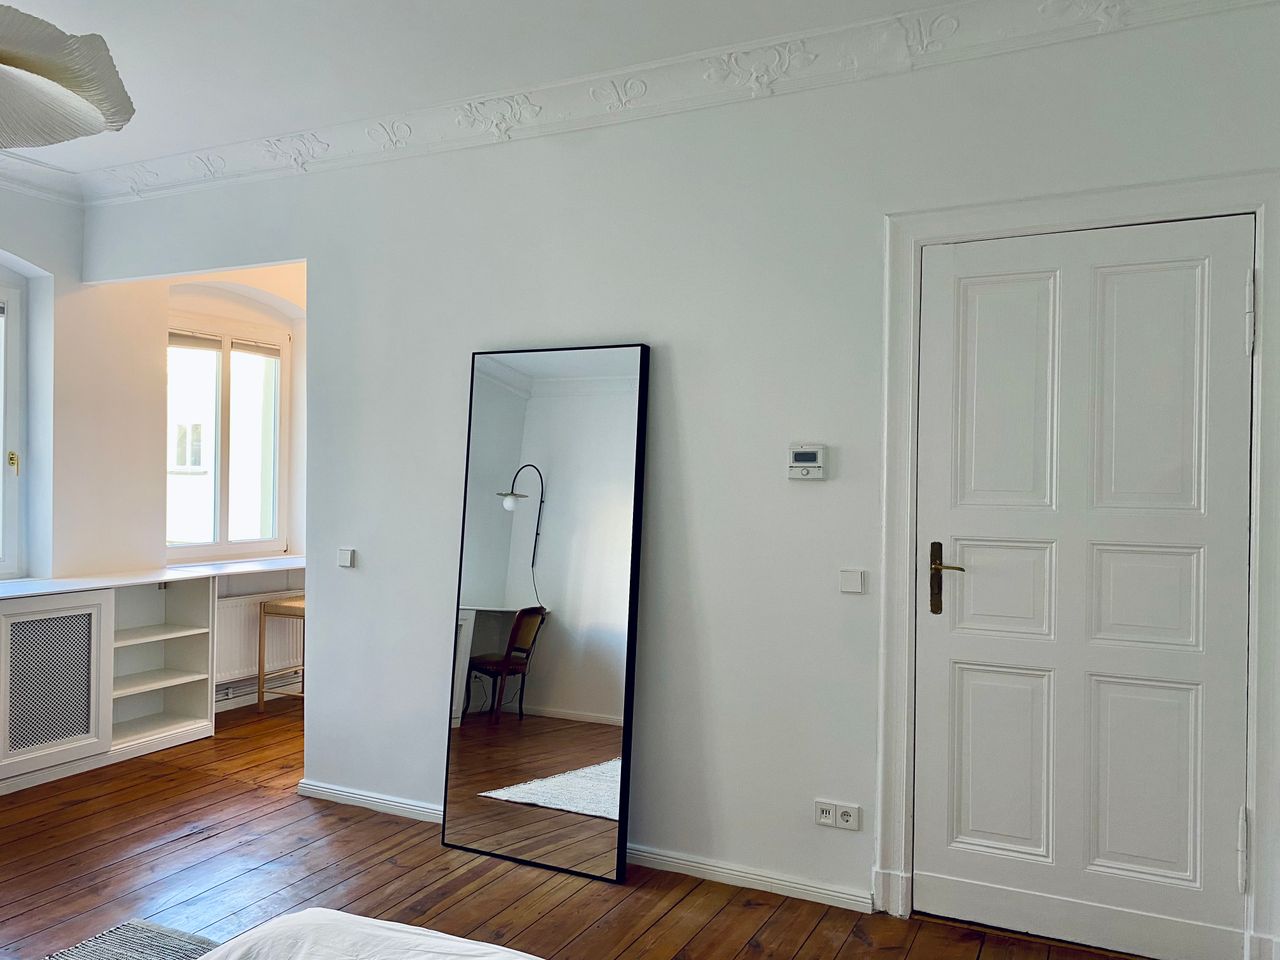 1-room apartment in an typical old building in Prenzlauer Berg